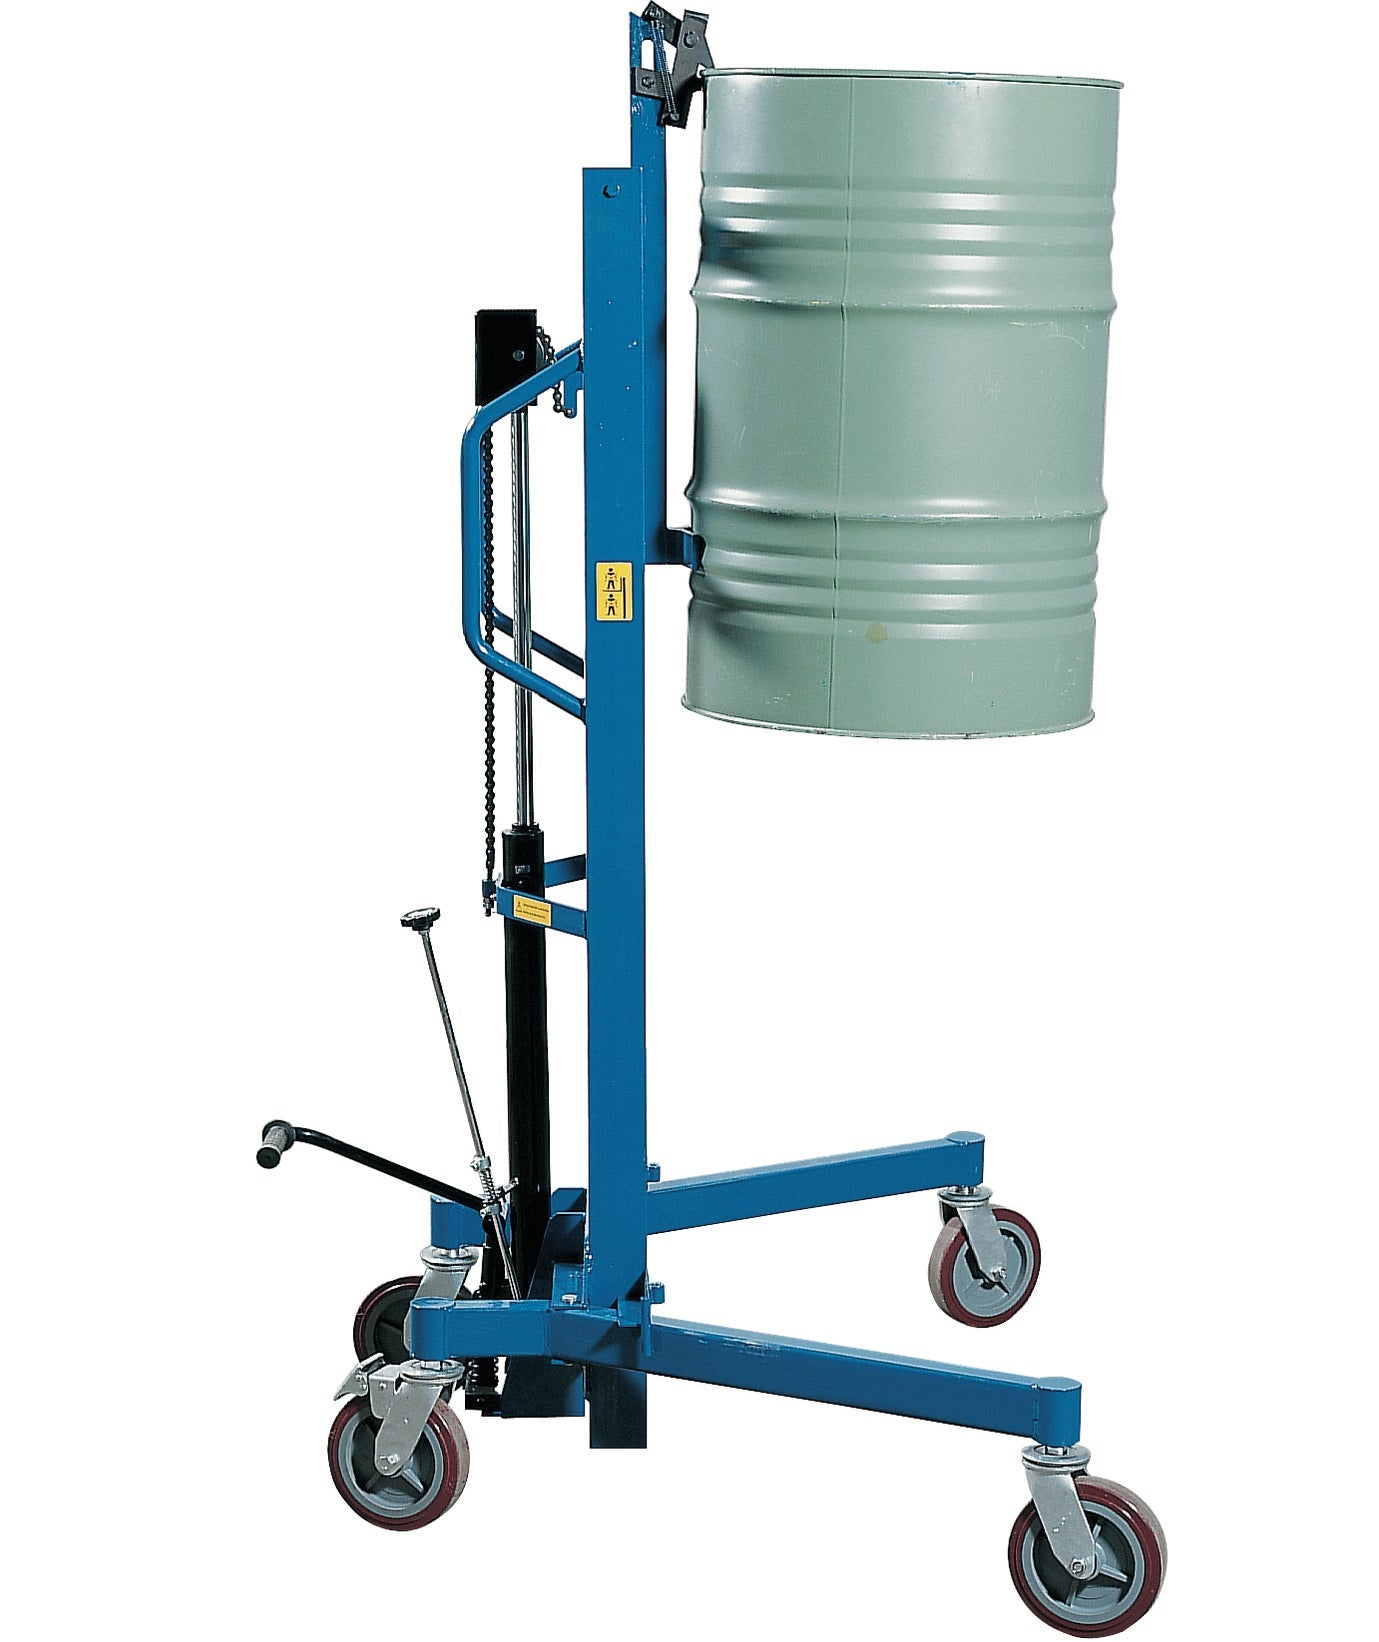 Drum lifter steel blue, for 350 kg, steel powder-coated smooth